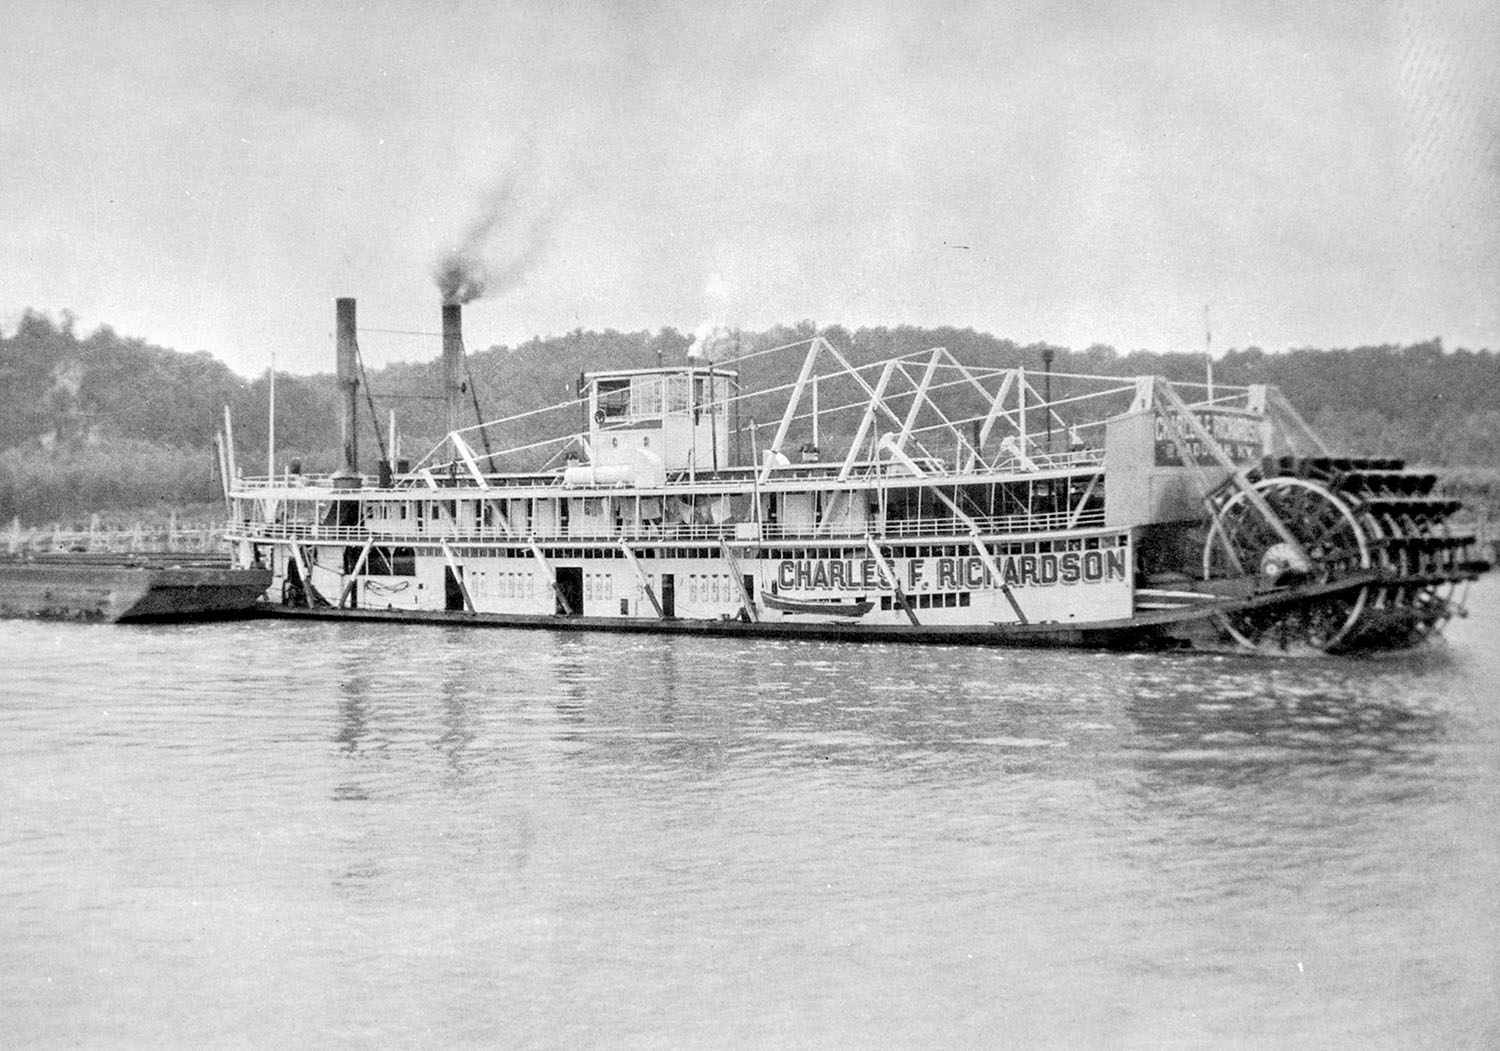 Str. Charles F. Richardson in coal towing days. (David Smith collection)